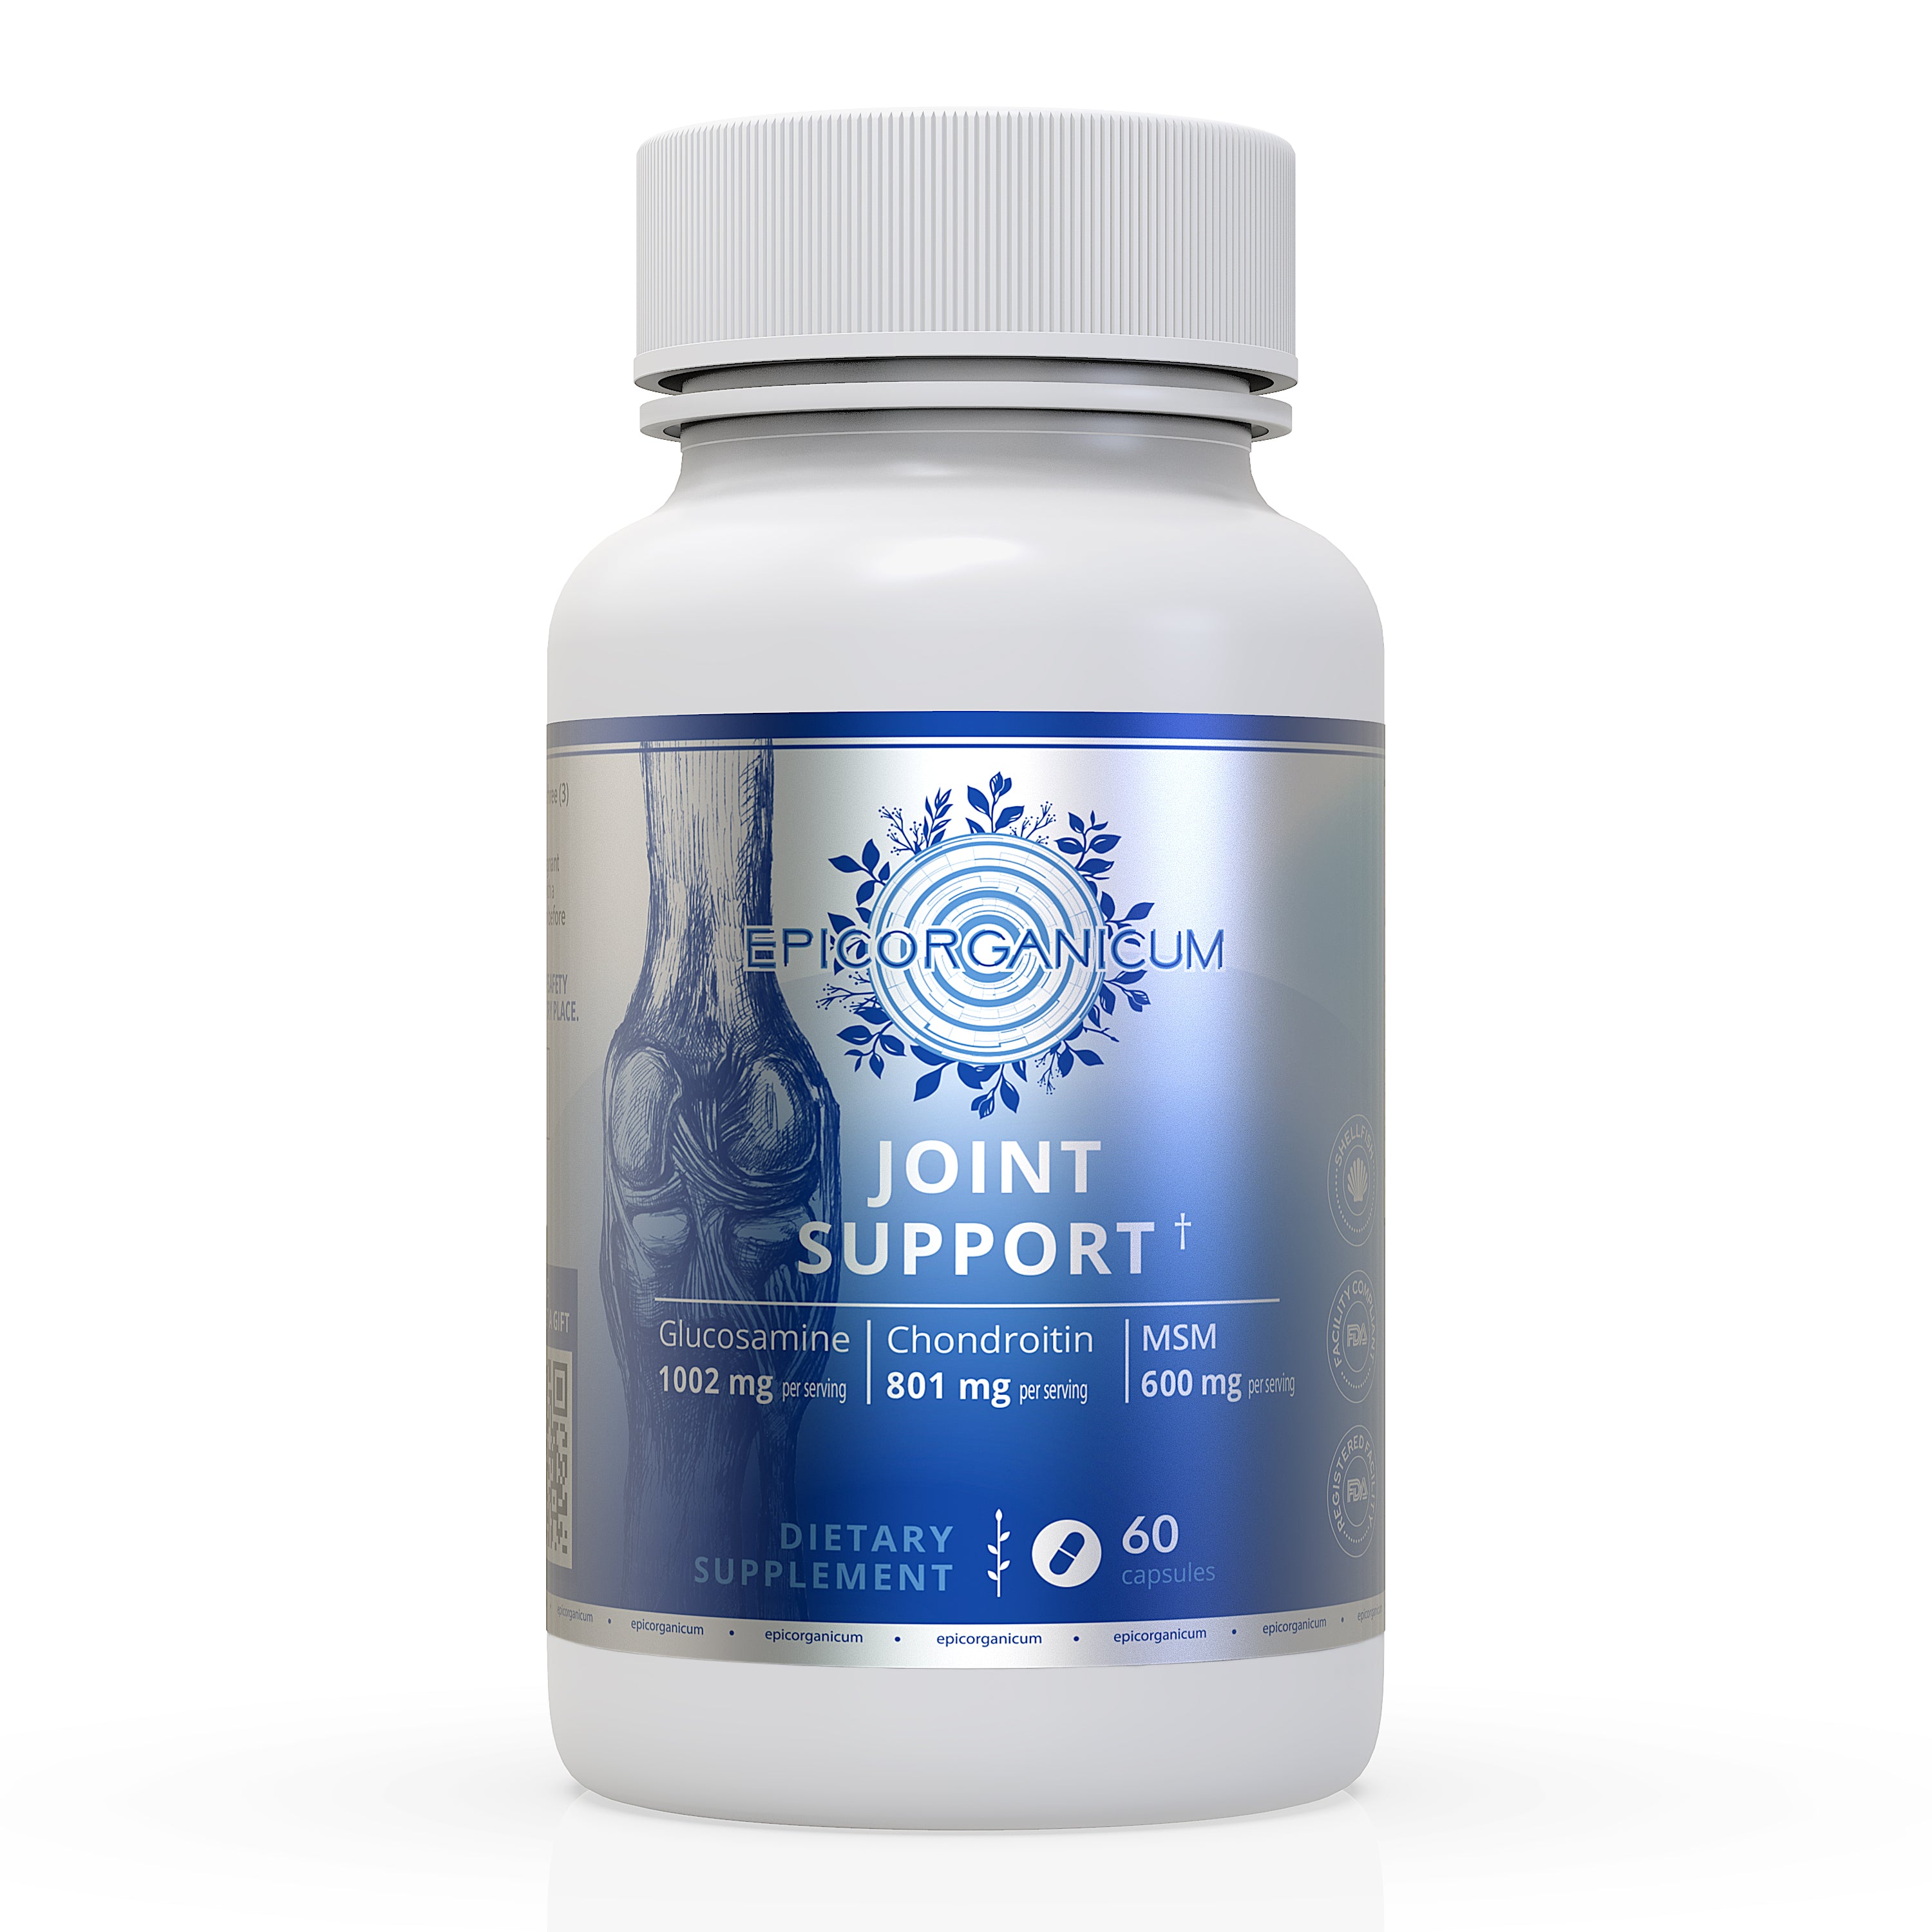 Joint Support Supplement for Extra Strength Relief - Glucosamine, Chondroitin, MSM, Turmeric